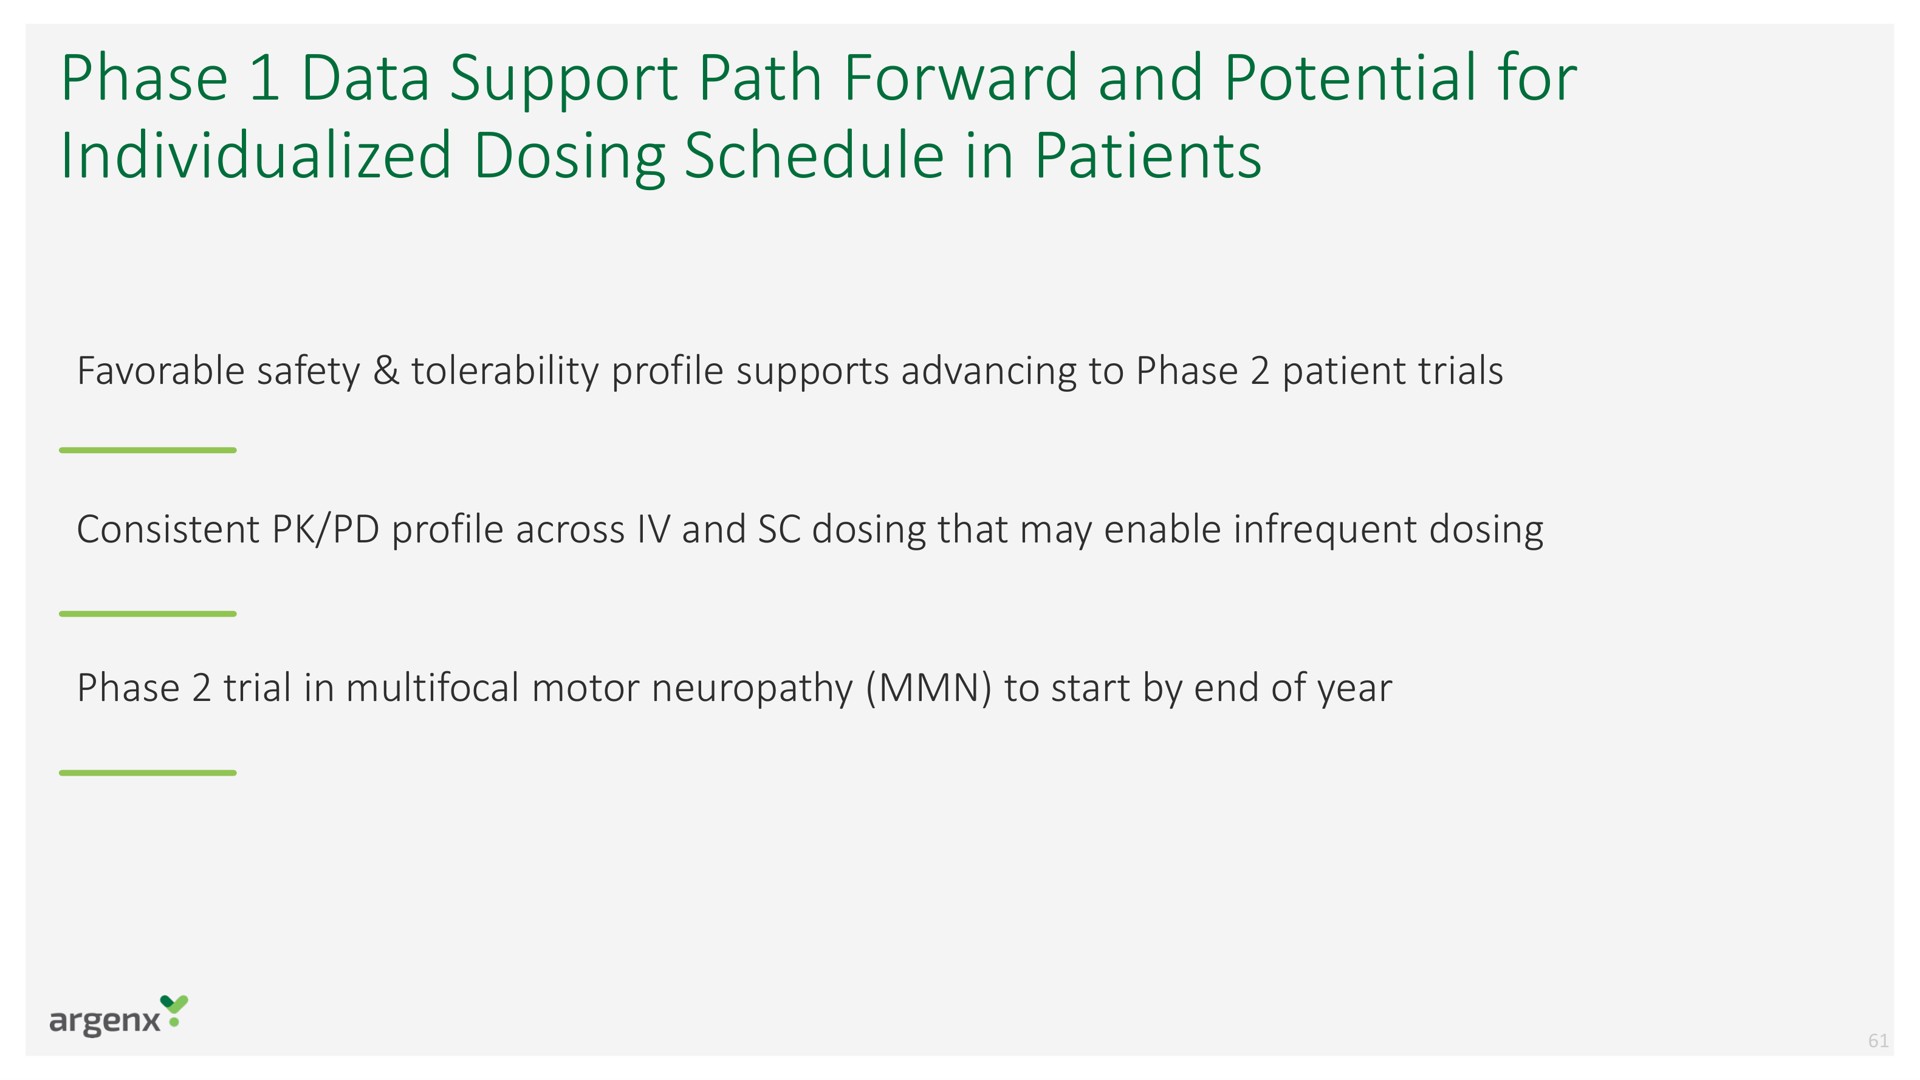 phase data support path forward and potential for individualized dosing schedule in patients | argenx SE